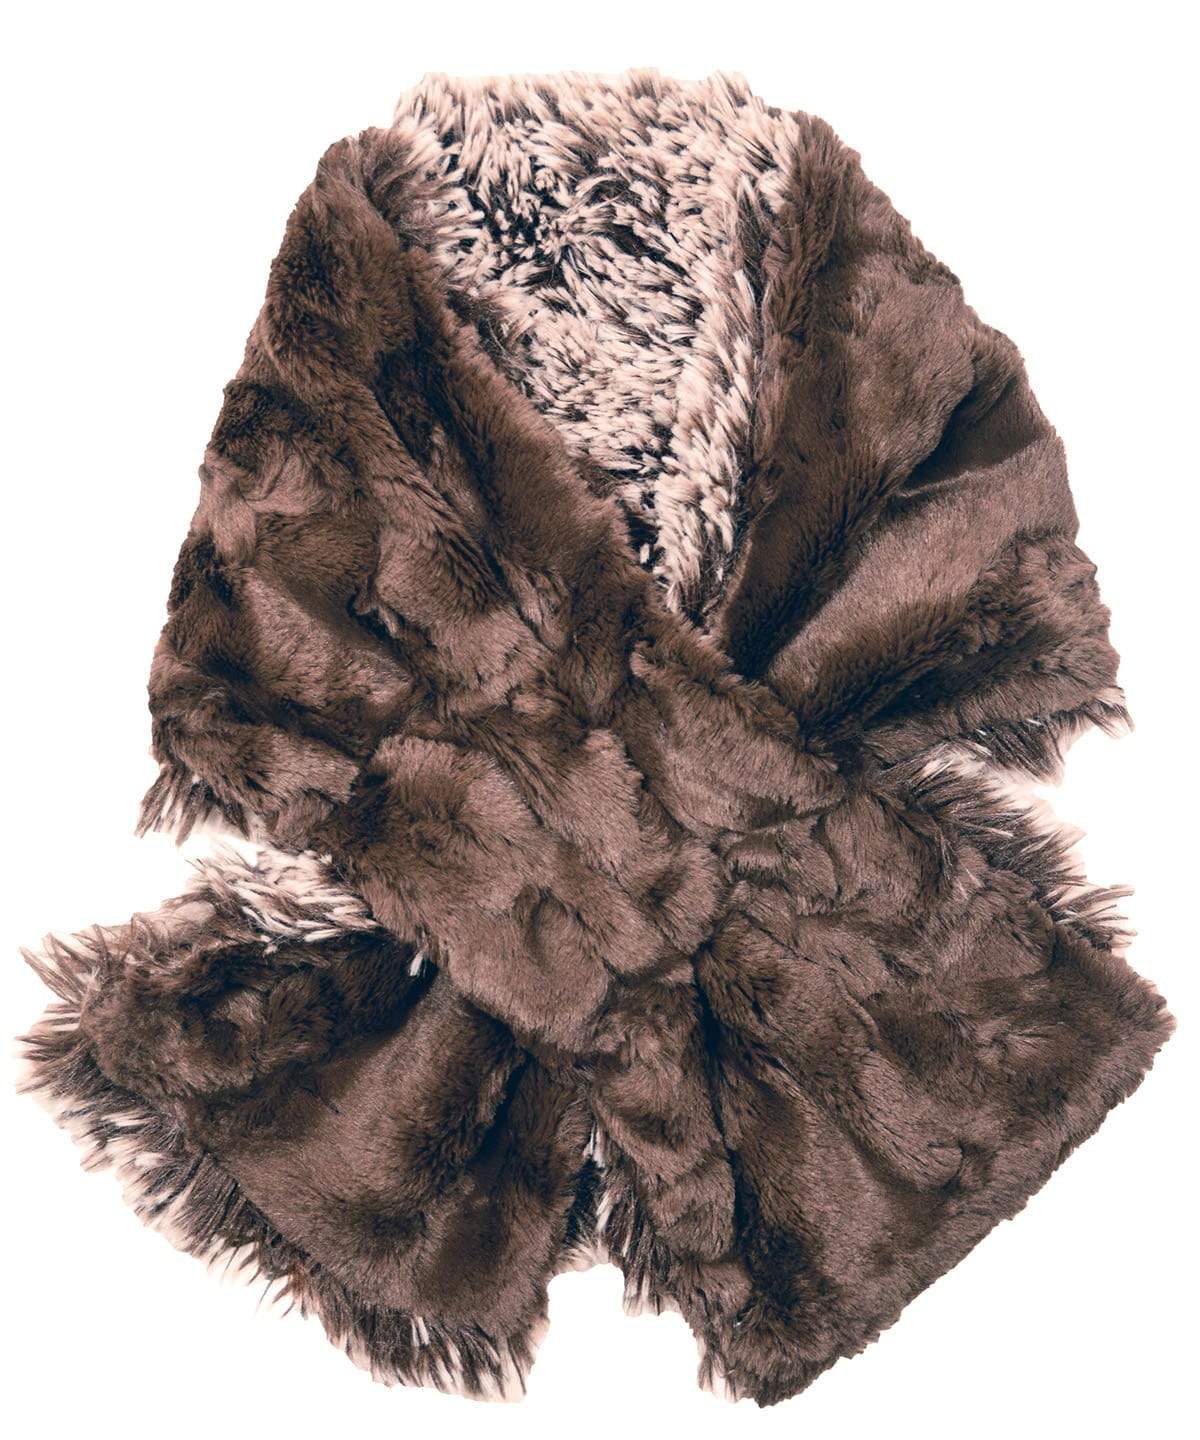 Pull-Thru Scarf | Silver Tipped Fox Faux Fur Brown with Cuddly Faux Fur | Handmade by Pandemonium Seattle USA